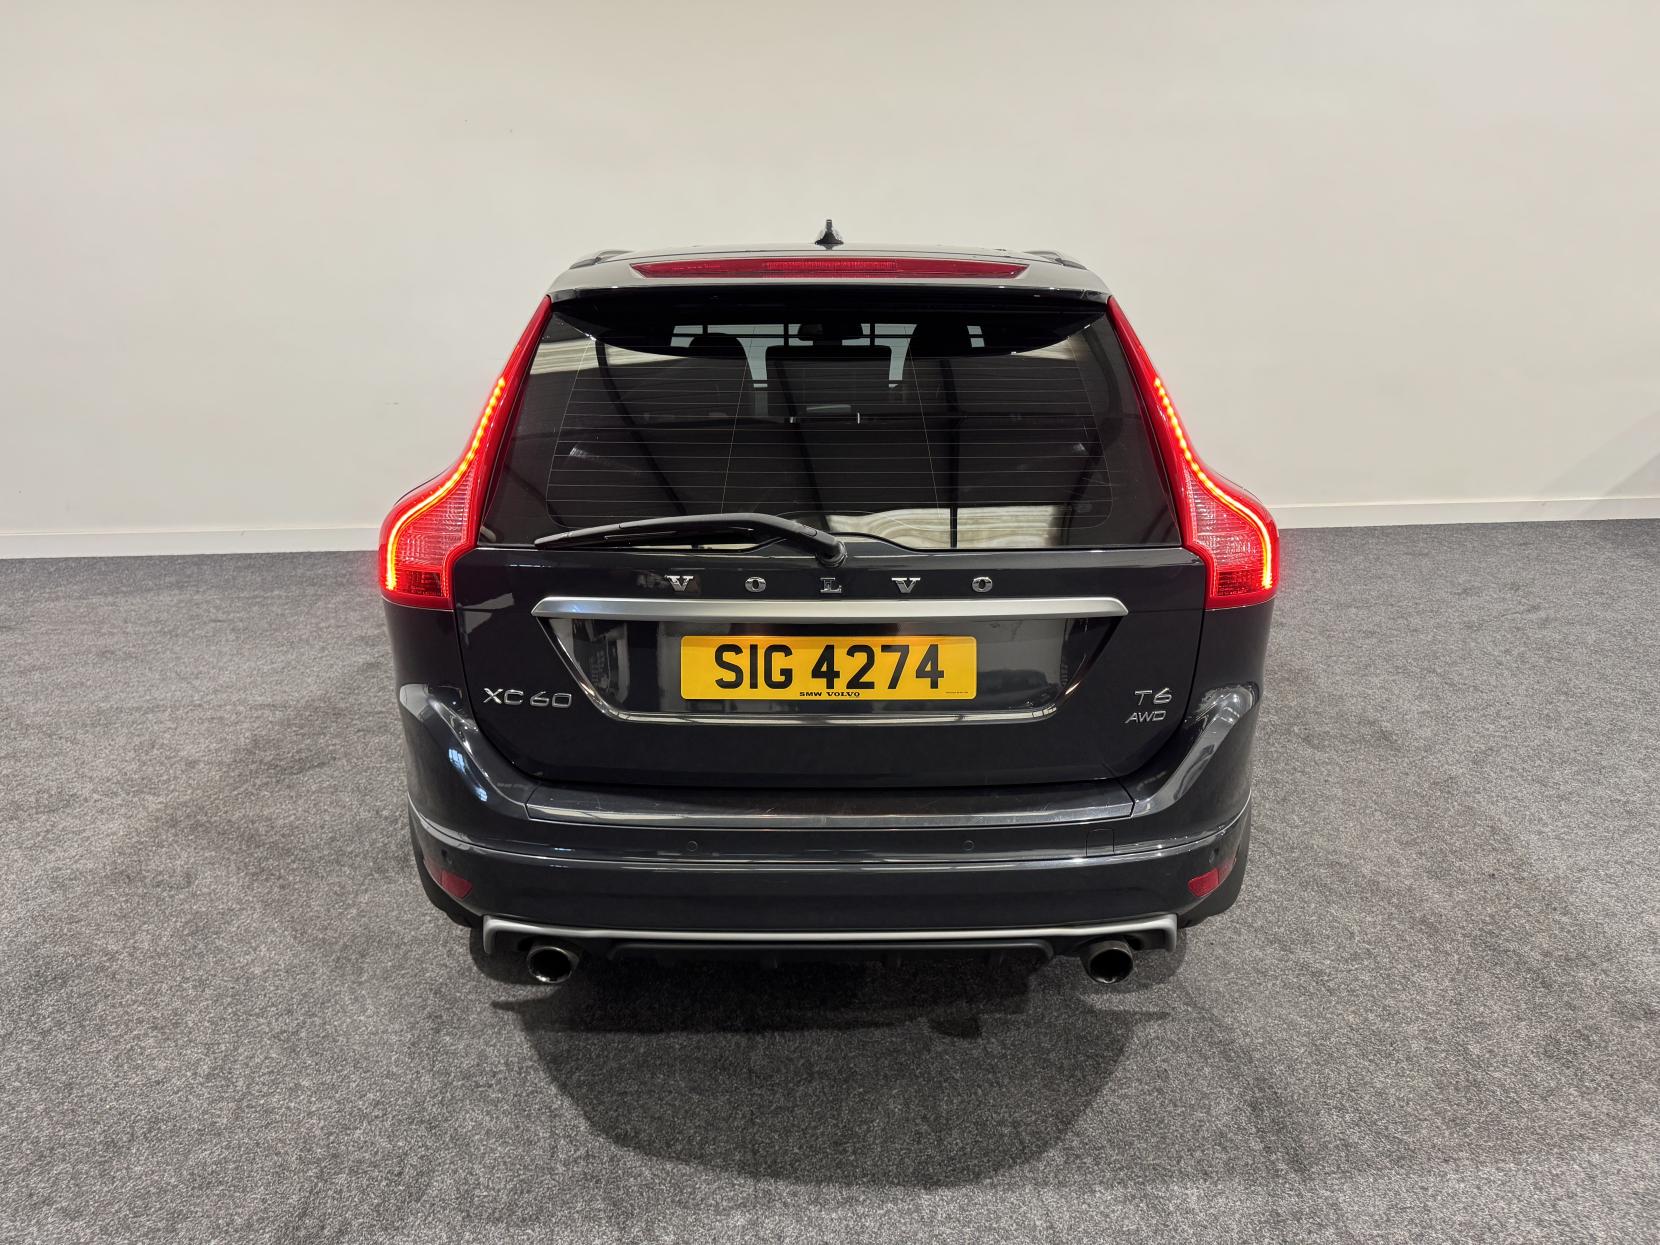 Volvo XC60 3.0 T6 R-Design Lux Nav SUV 5dr Petrol Geartronic AWD Euro 5 (304 ps)